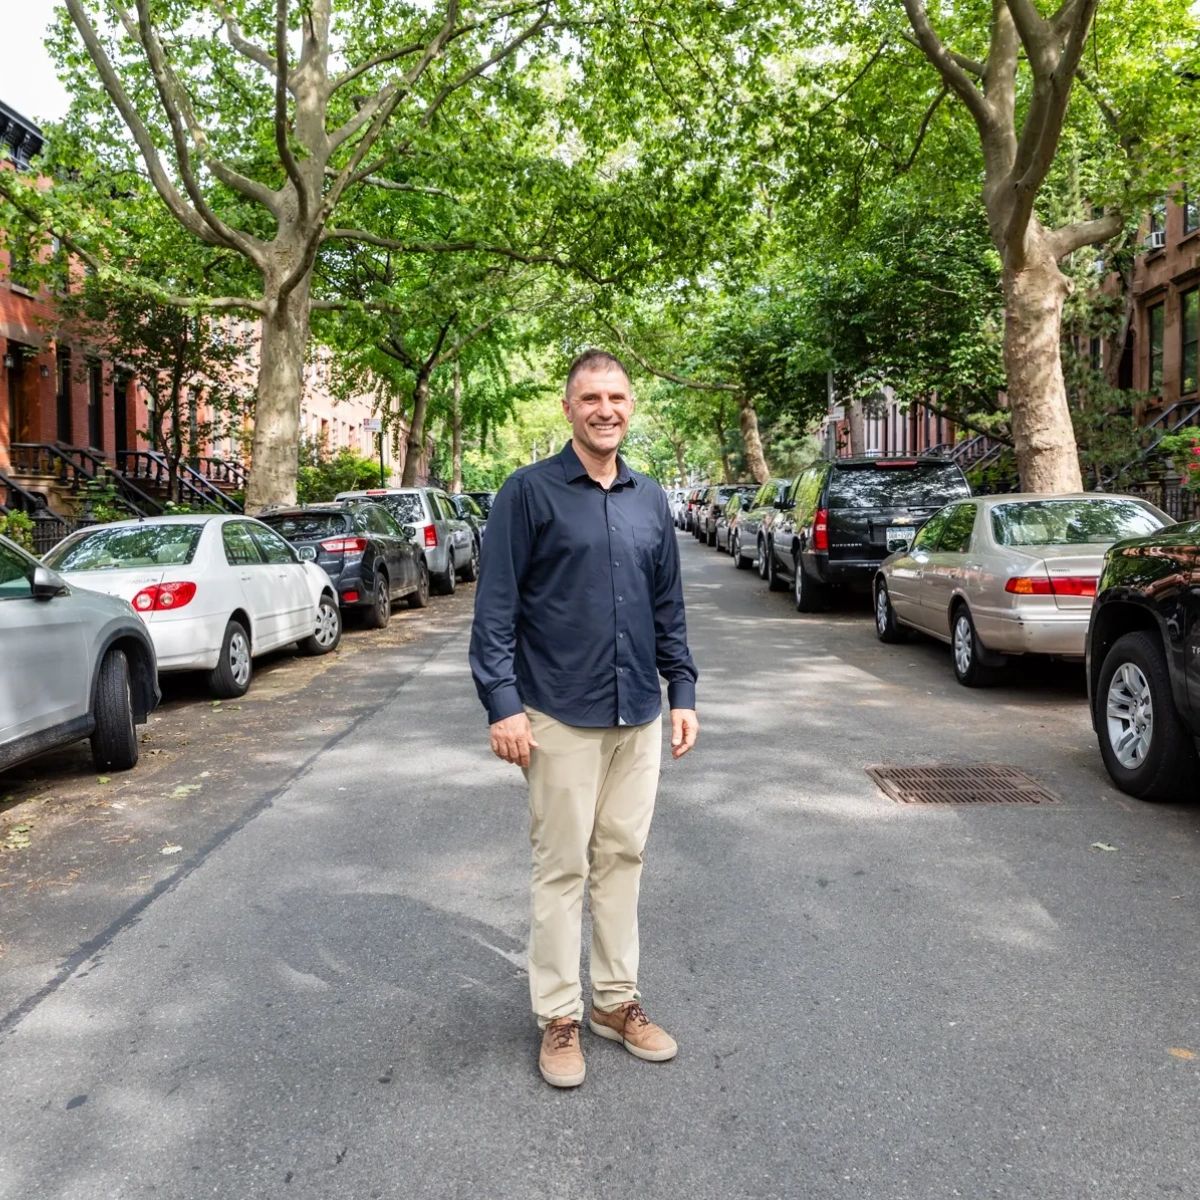 Welcome to Brooklyn, NY! As a local realtor, I'm excited to share all the hidden gems and unique neighborhoods this borough has to offer. Let's find the perfect home for you. #BrooklynRealEstate #NYCLiving #FindYourHome
penrealty.net